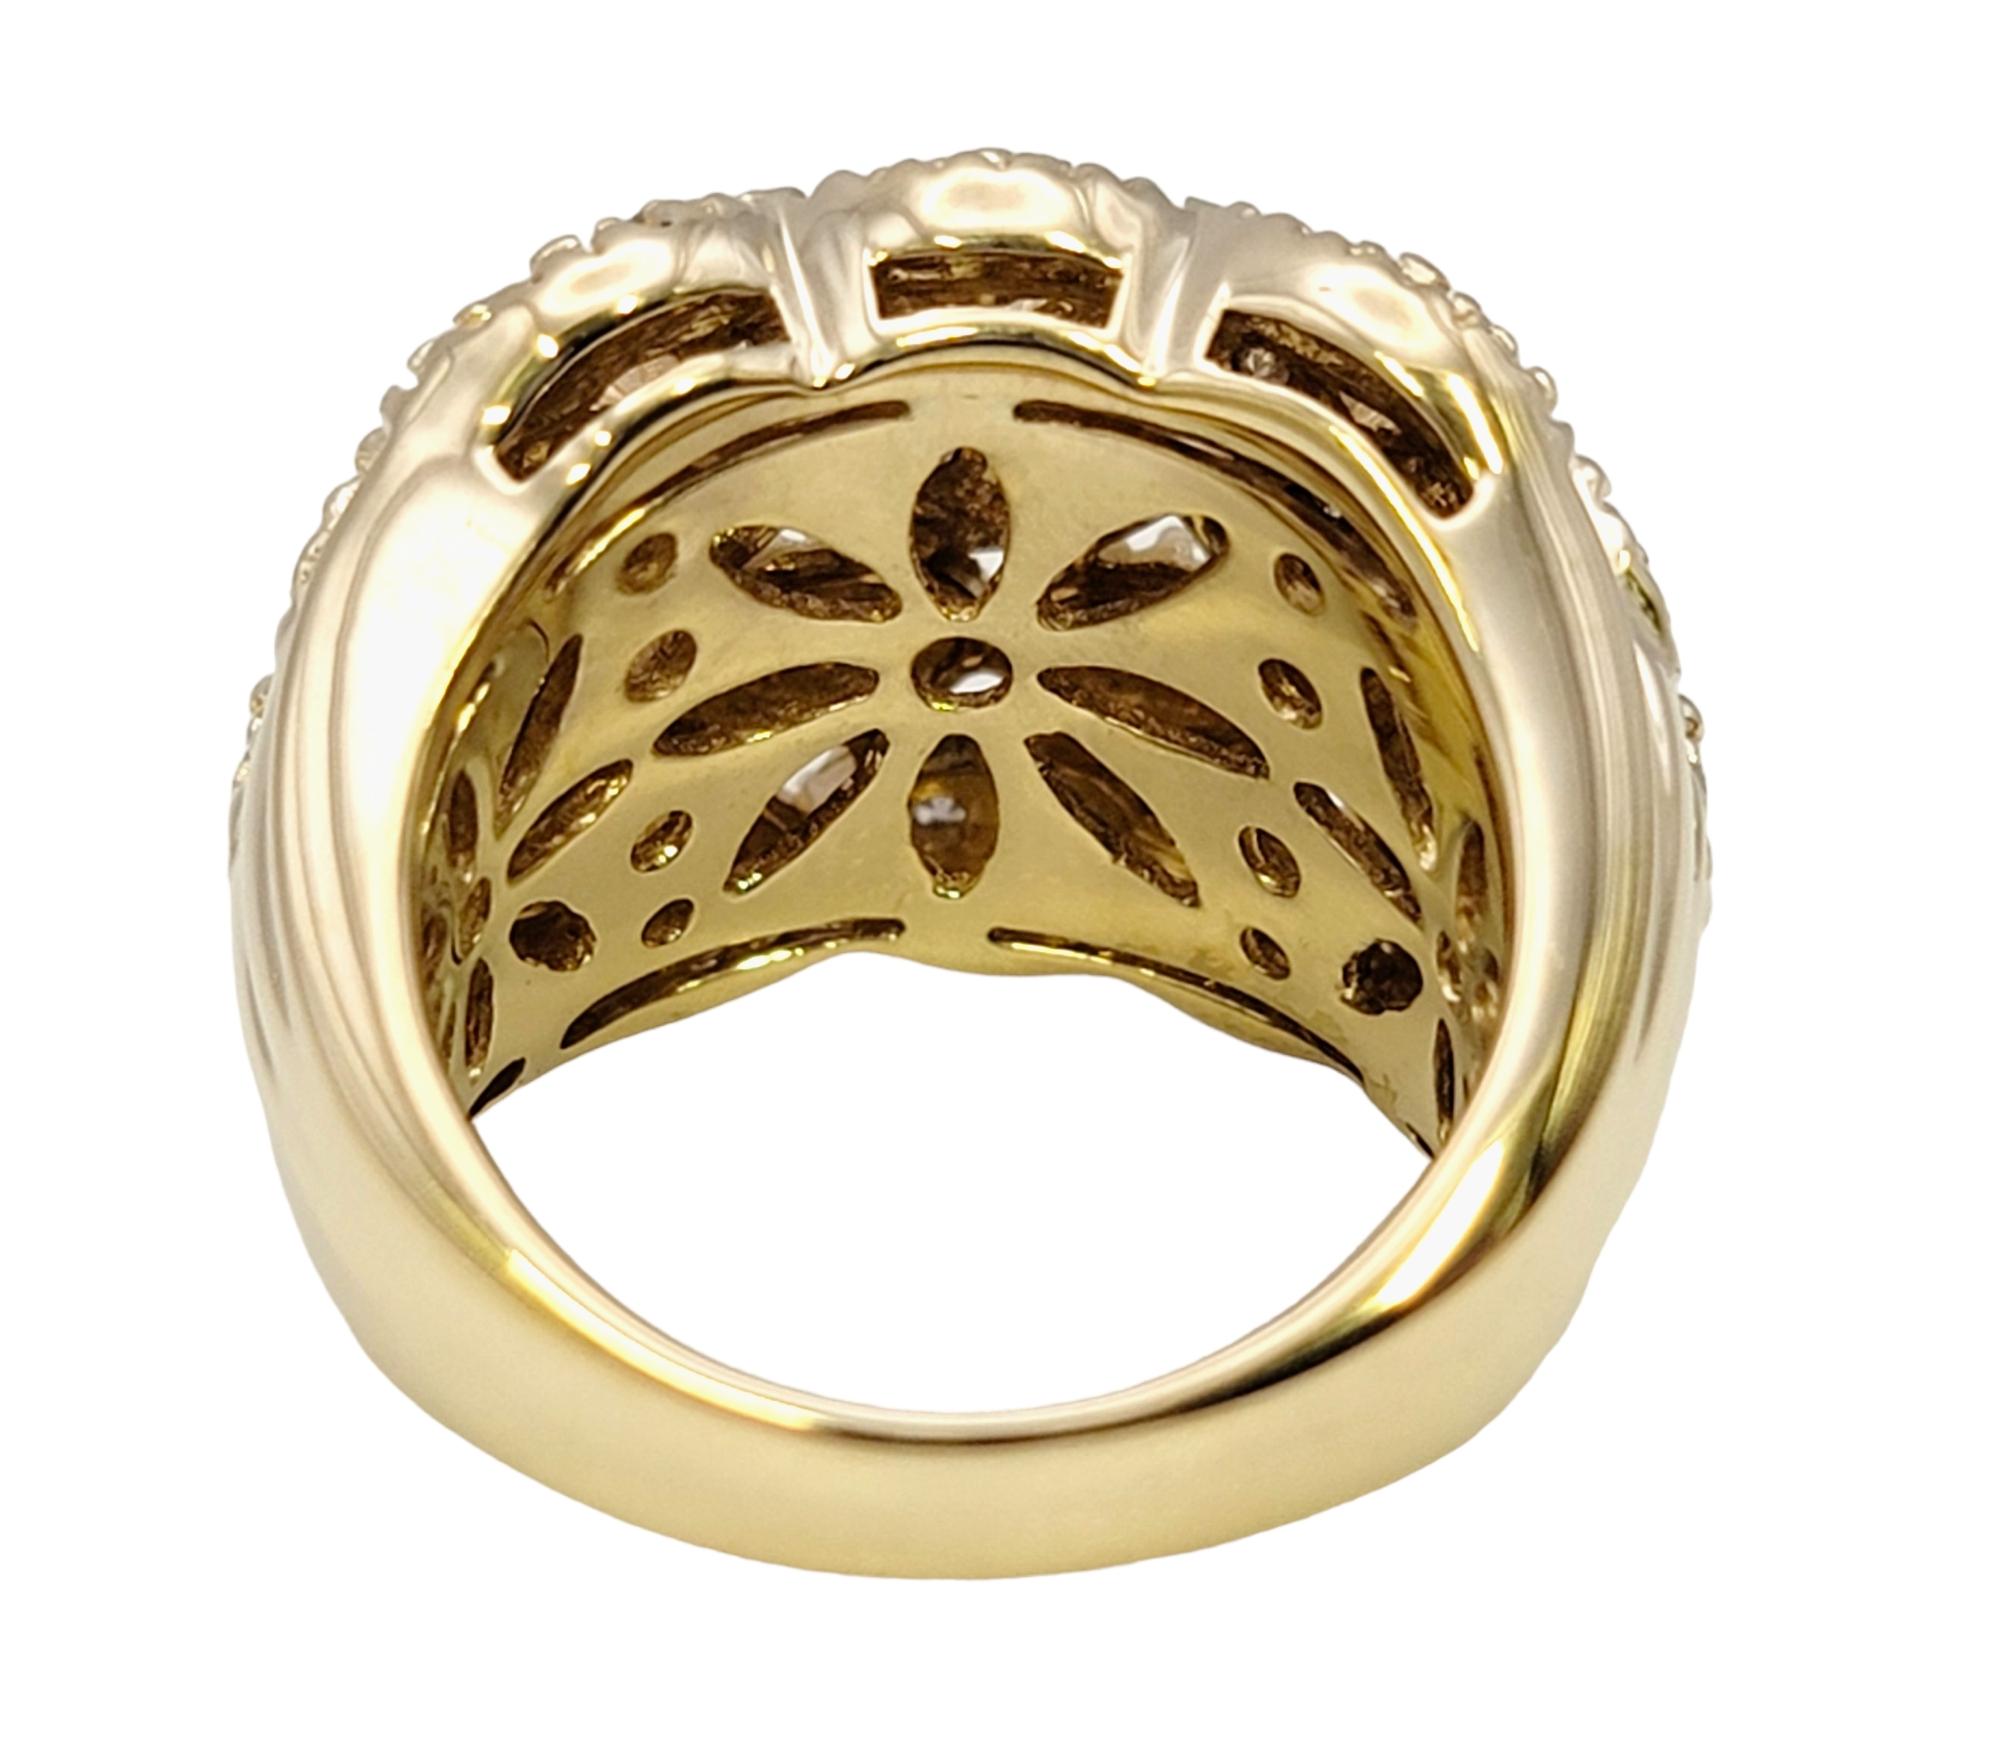 Sonia B. Diamond Multi Row Wide Domed Cocktail Ring in 14 Karat Yellow Gold In Good Condition For Sale In Scottsdale, AZ